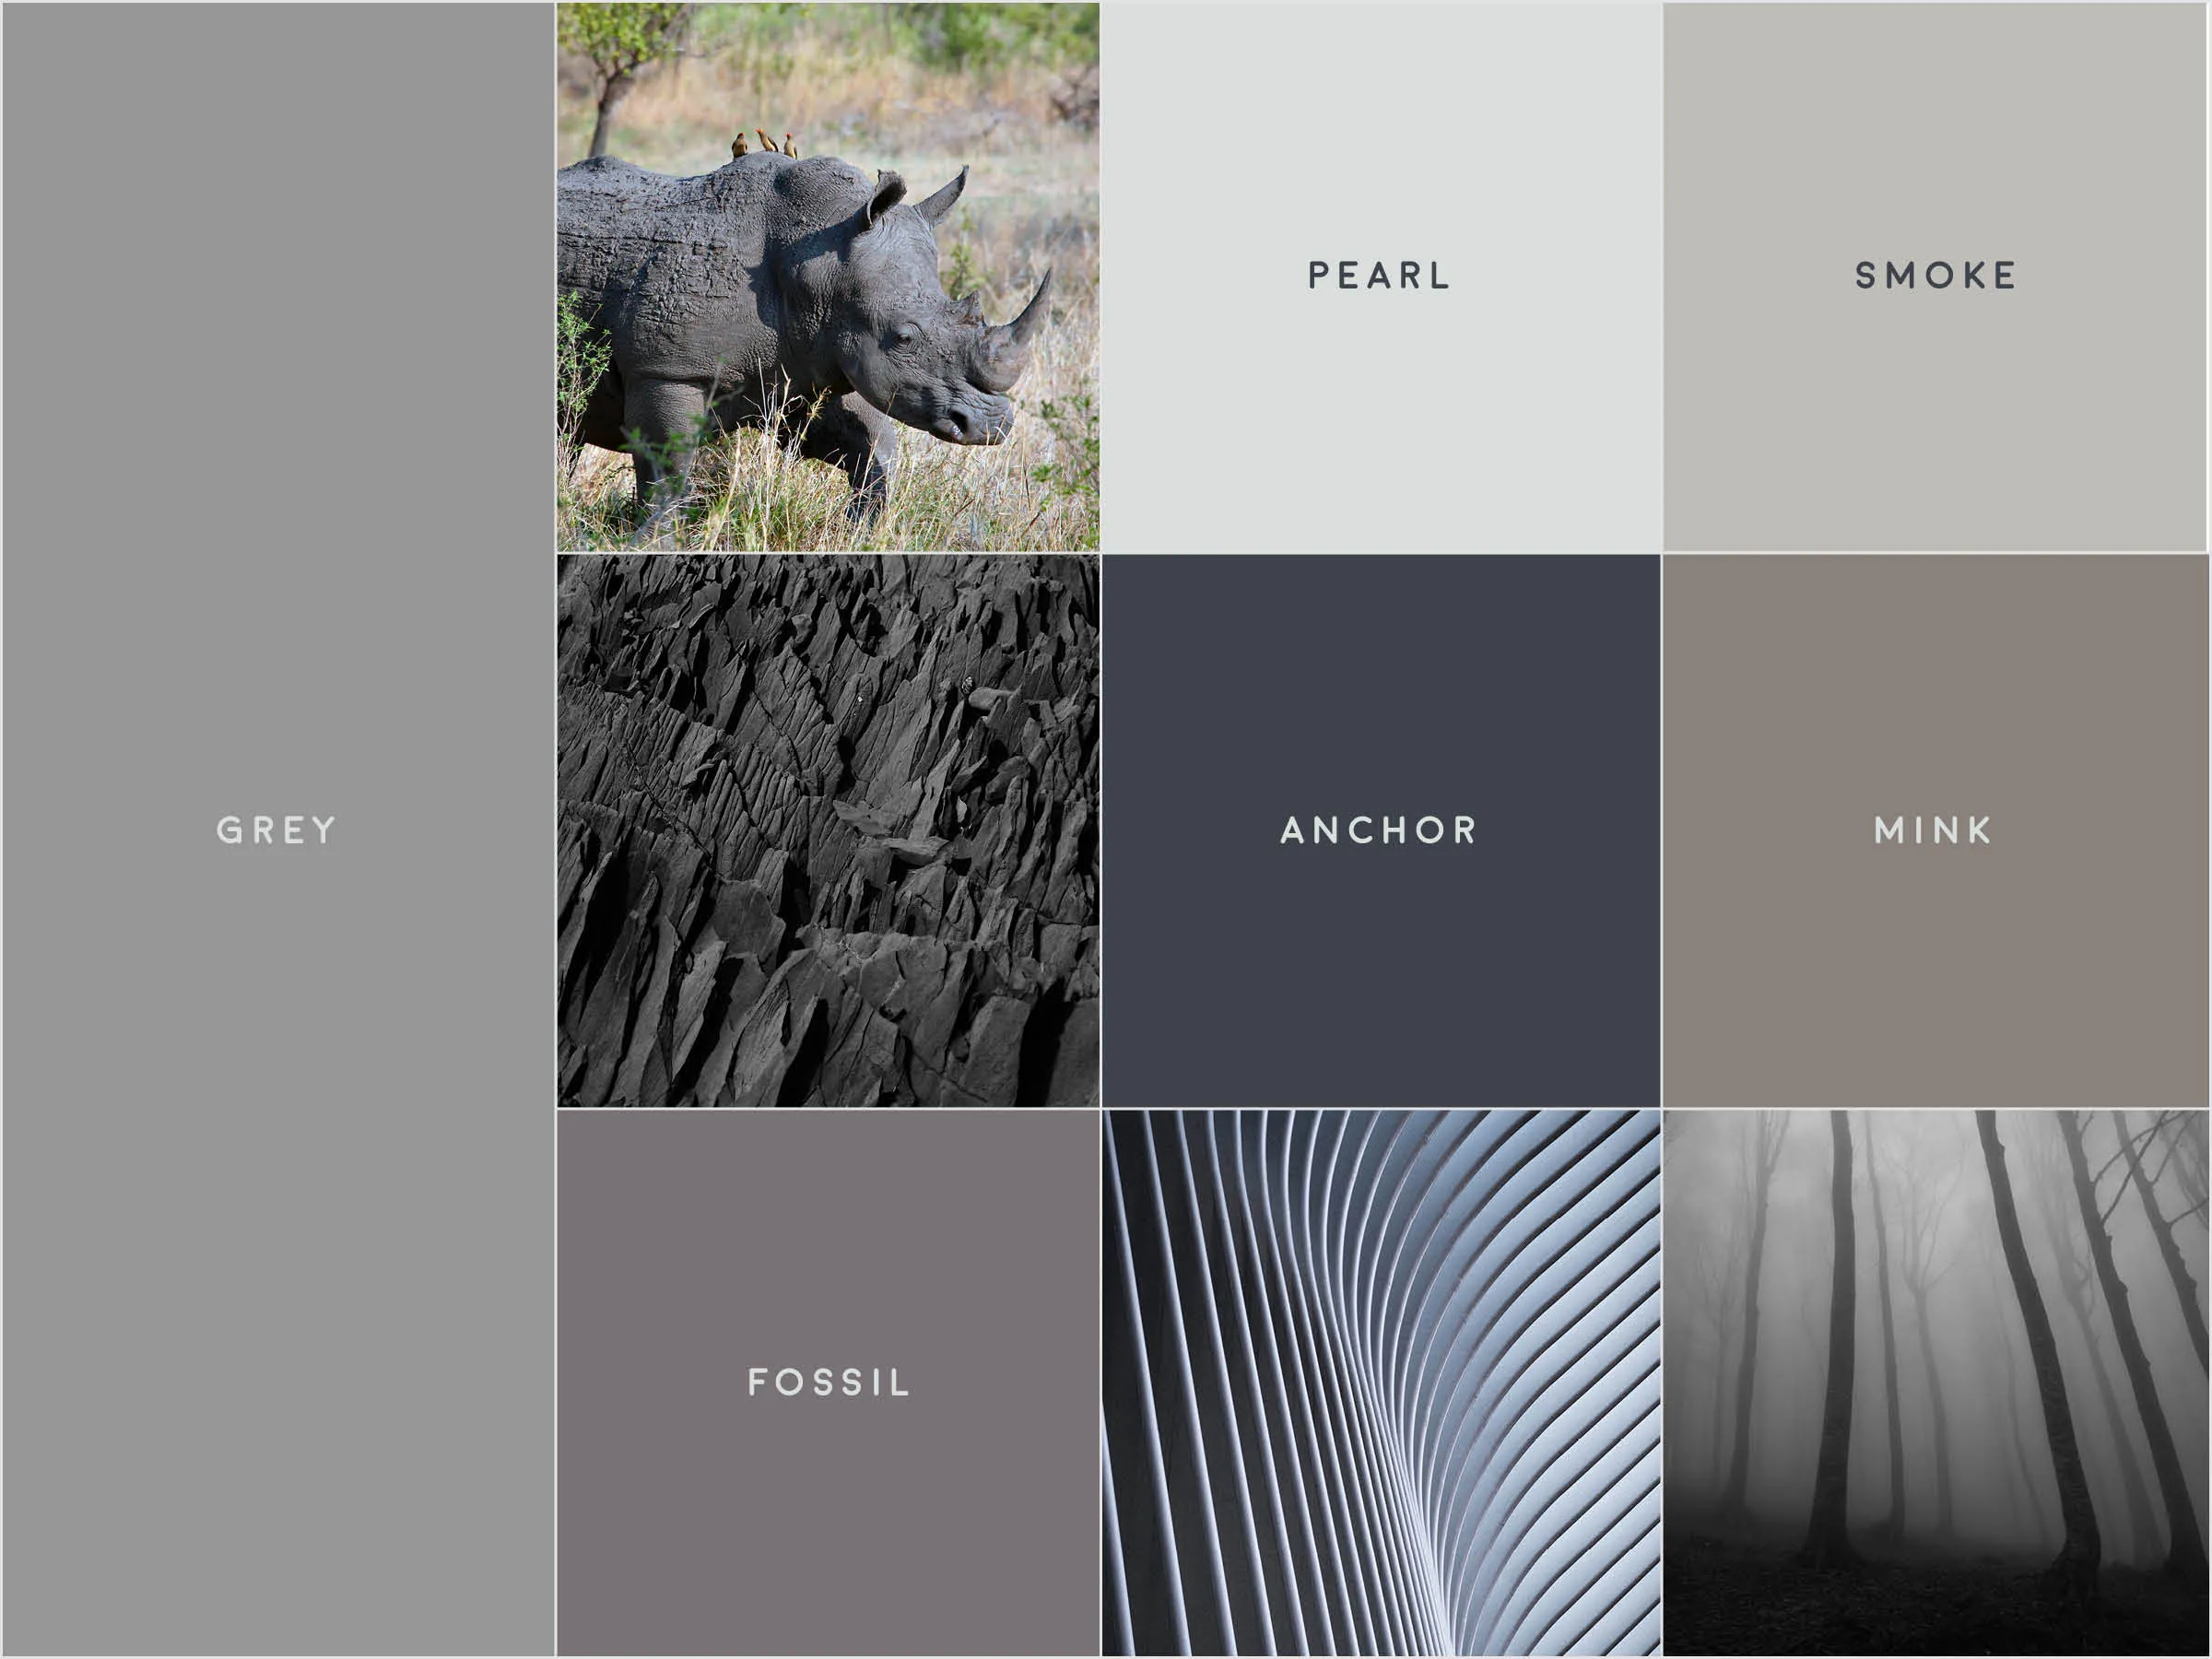 A gridded image with various tones of grey, with small photographs of a rhinoceros, slate, a misty forest, and a detail of modern architecture